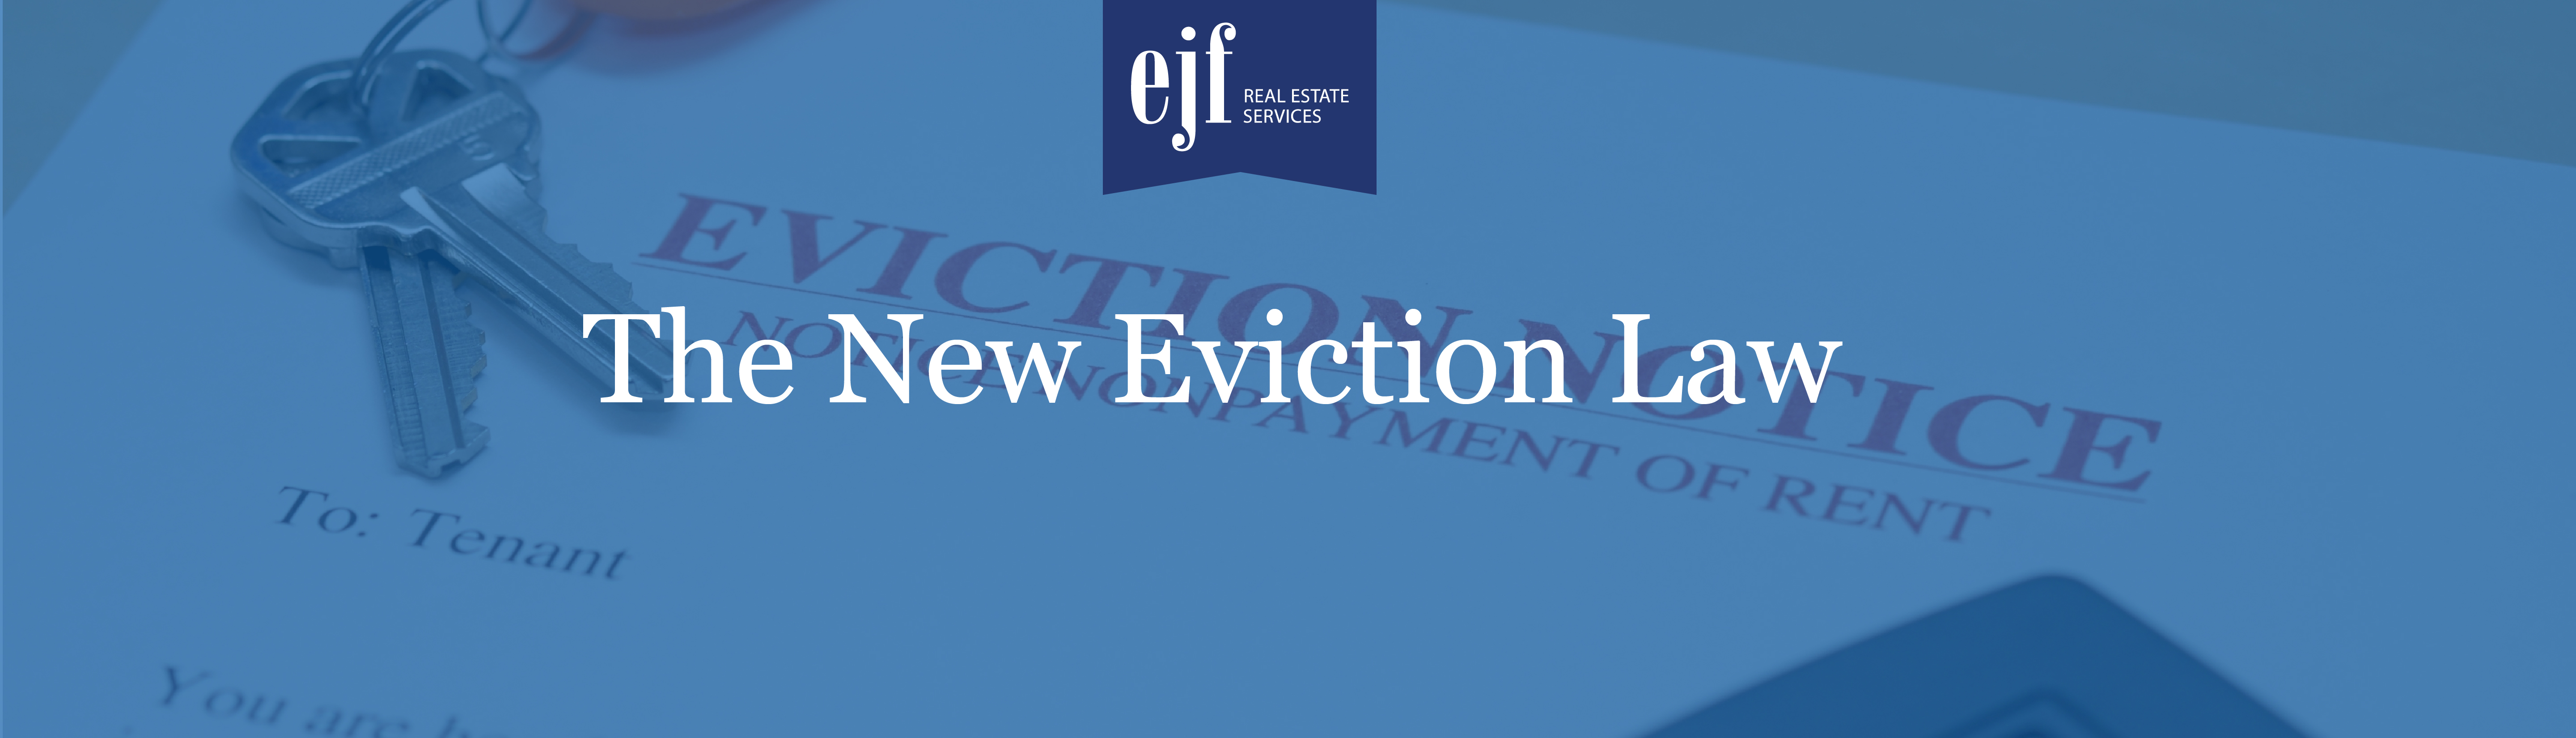 District of Columbia Property Management New Eviction Law